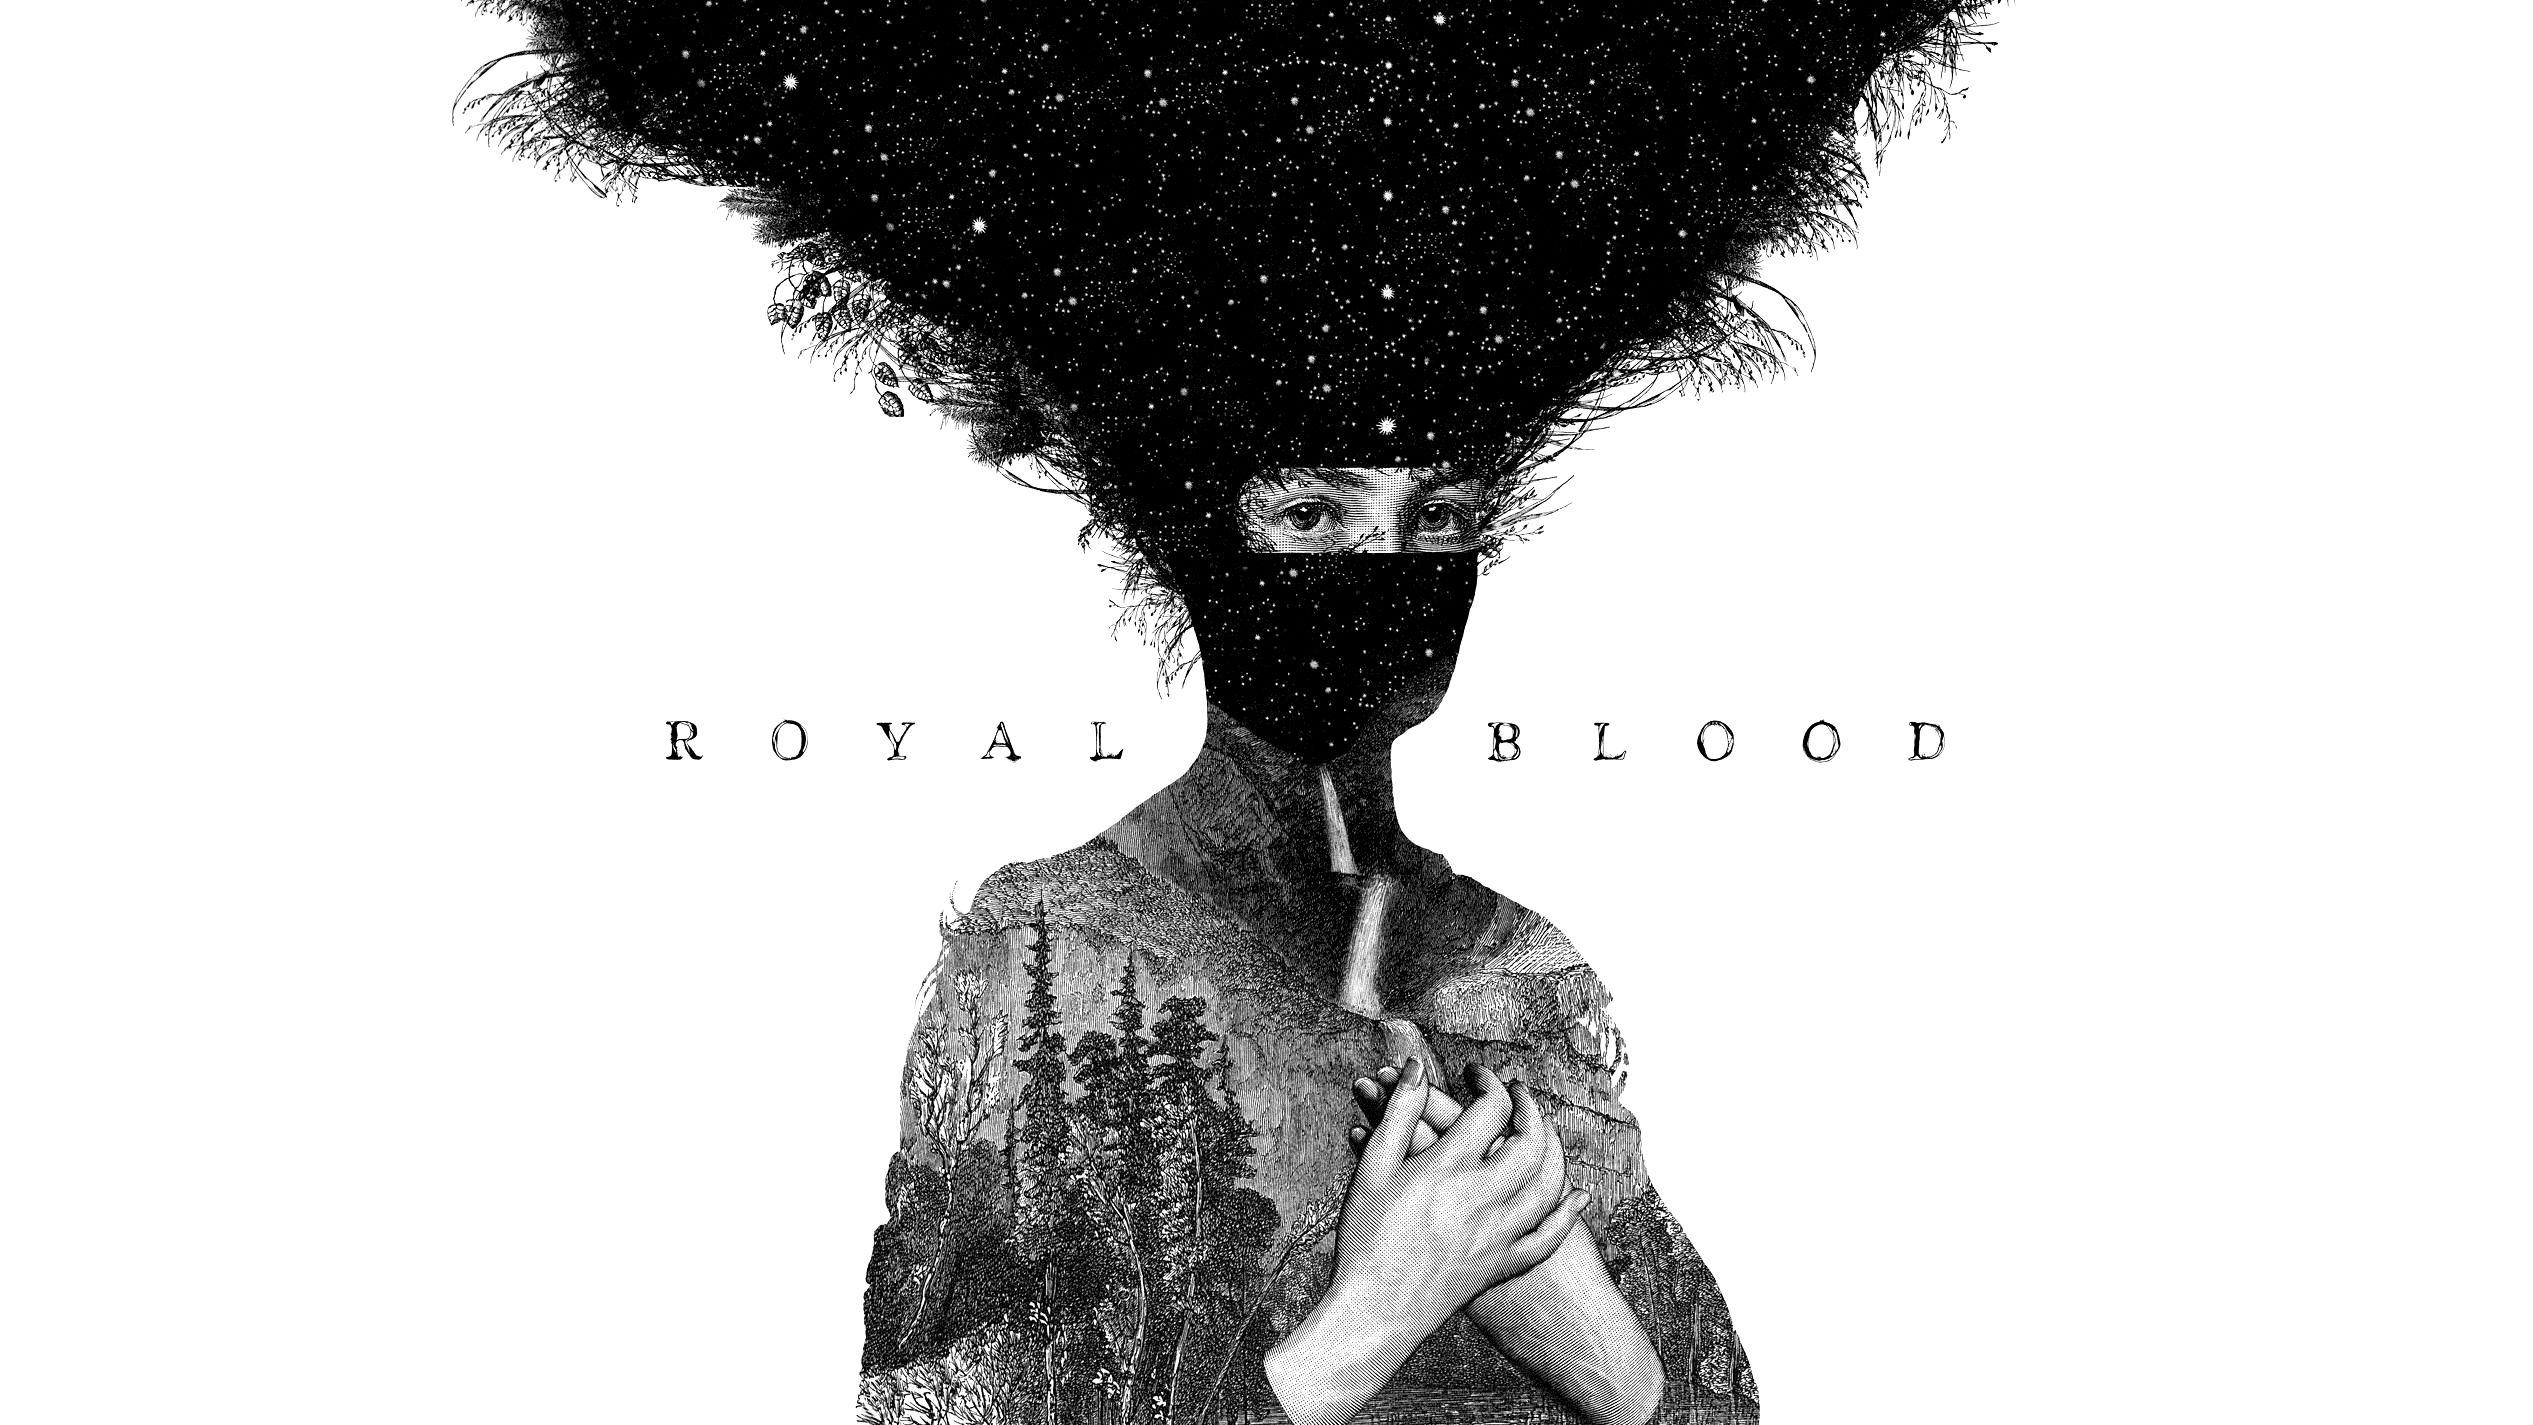 HD desktop wallpaper featuring artistic monochrome imagery with an abstract design tagged as Royal Blood.